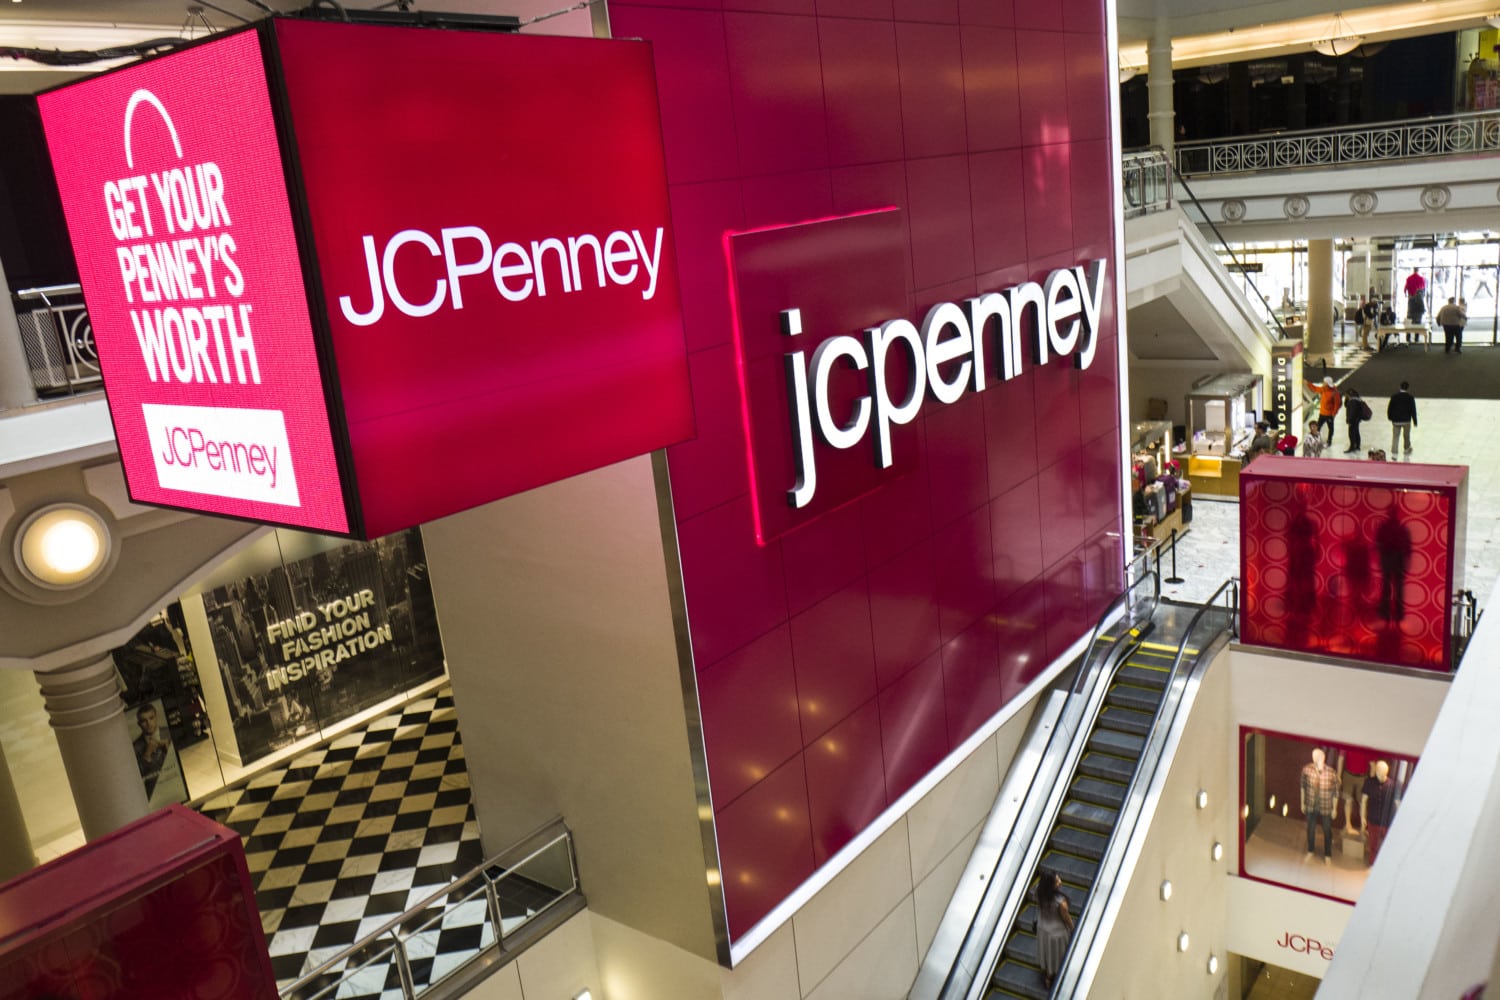 jcpenney photo